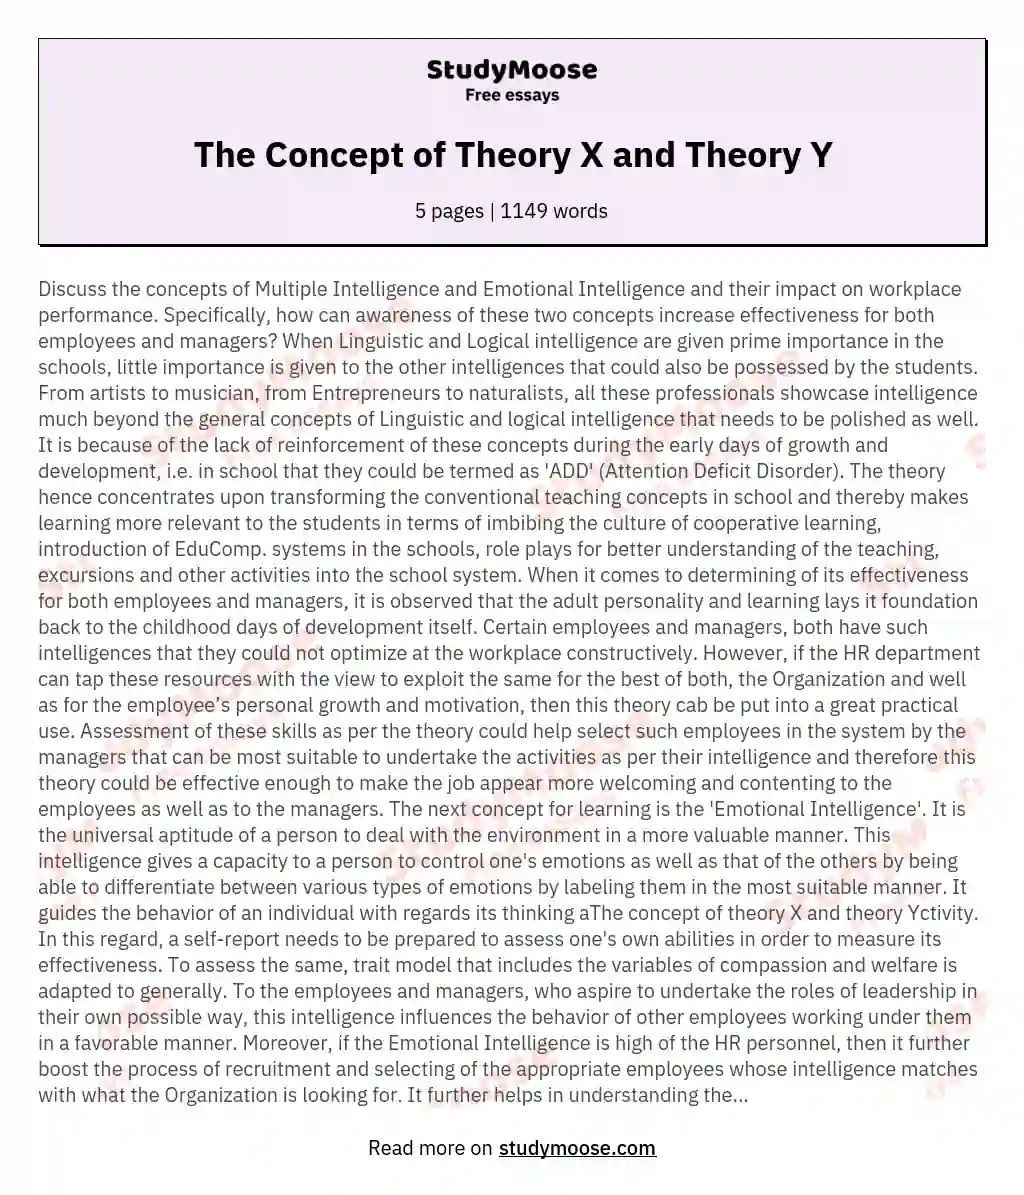 The Concept of Theory X and Theory Y essay